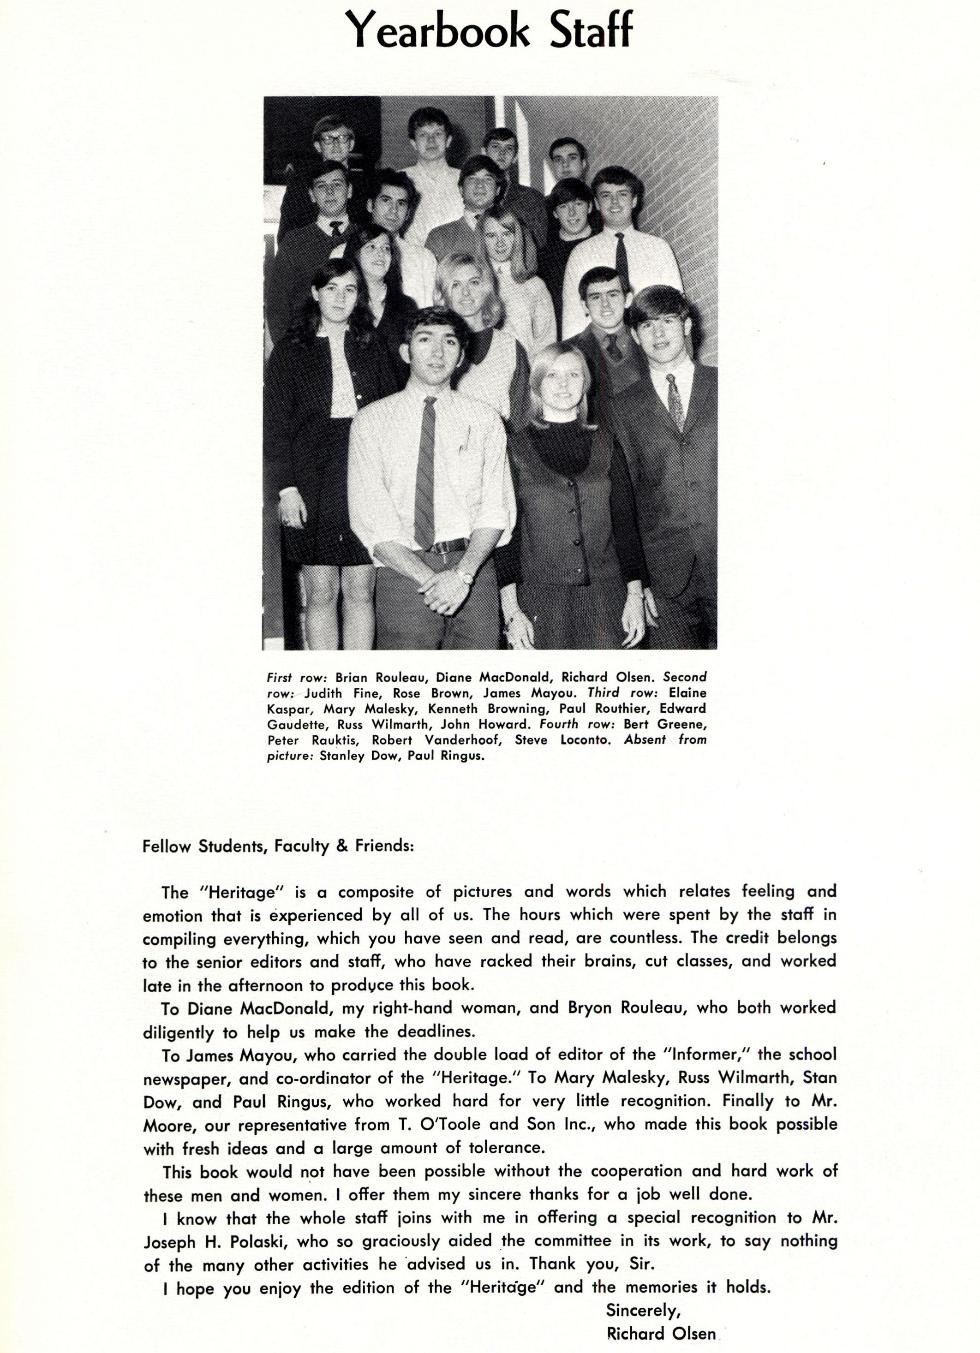 Worcester Industrial Technical Institute - Class of 1969 Yearbook Staff